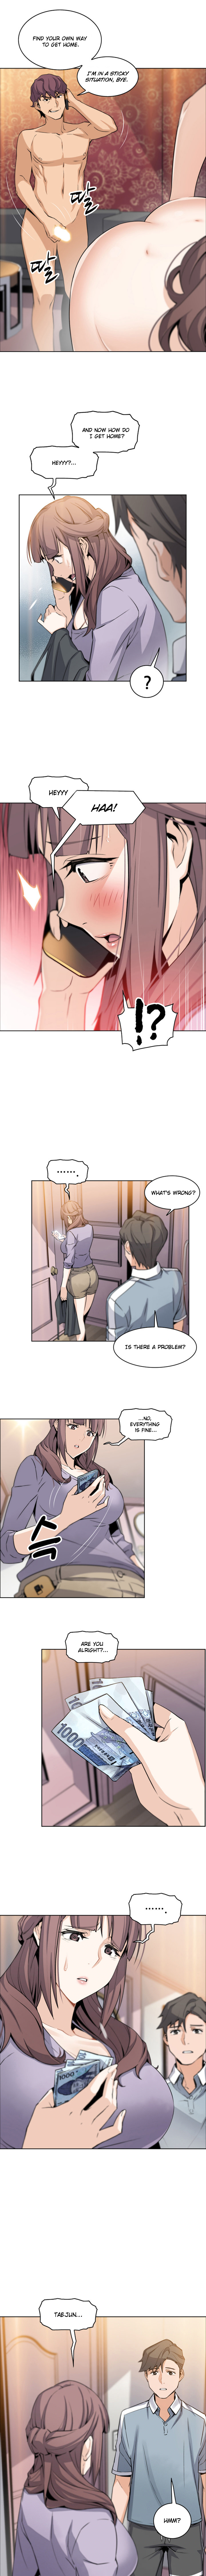 Housekeeper Manhwa - Chapter 9 Page 12